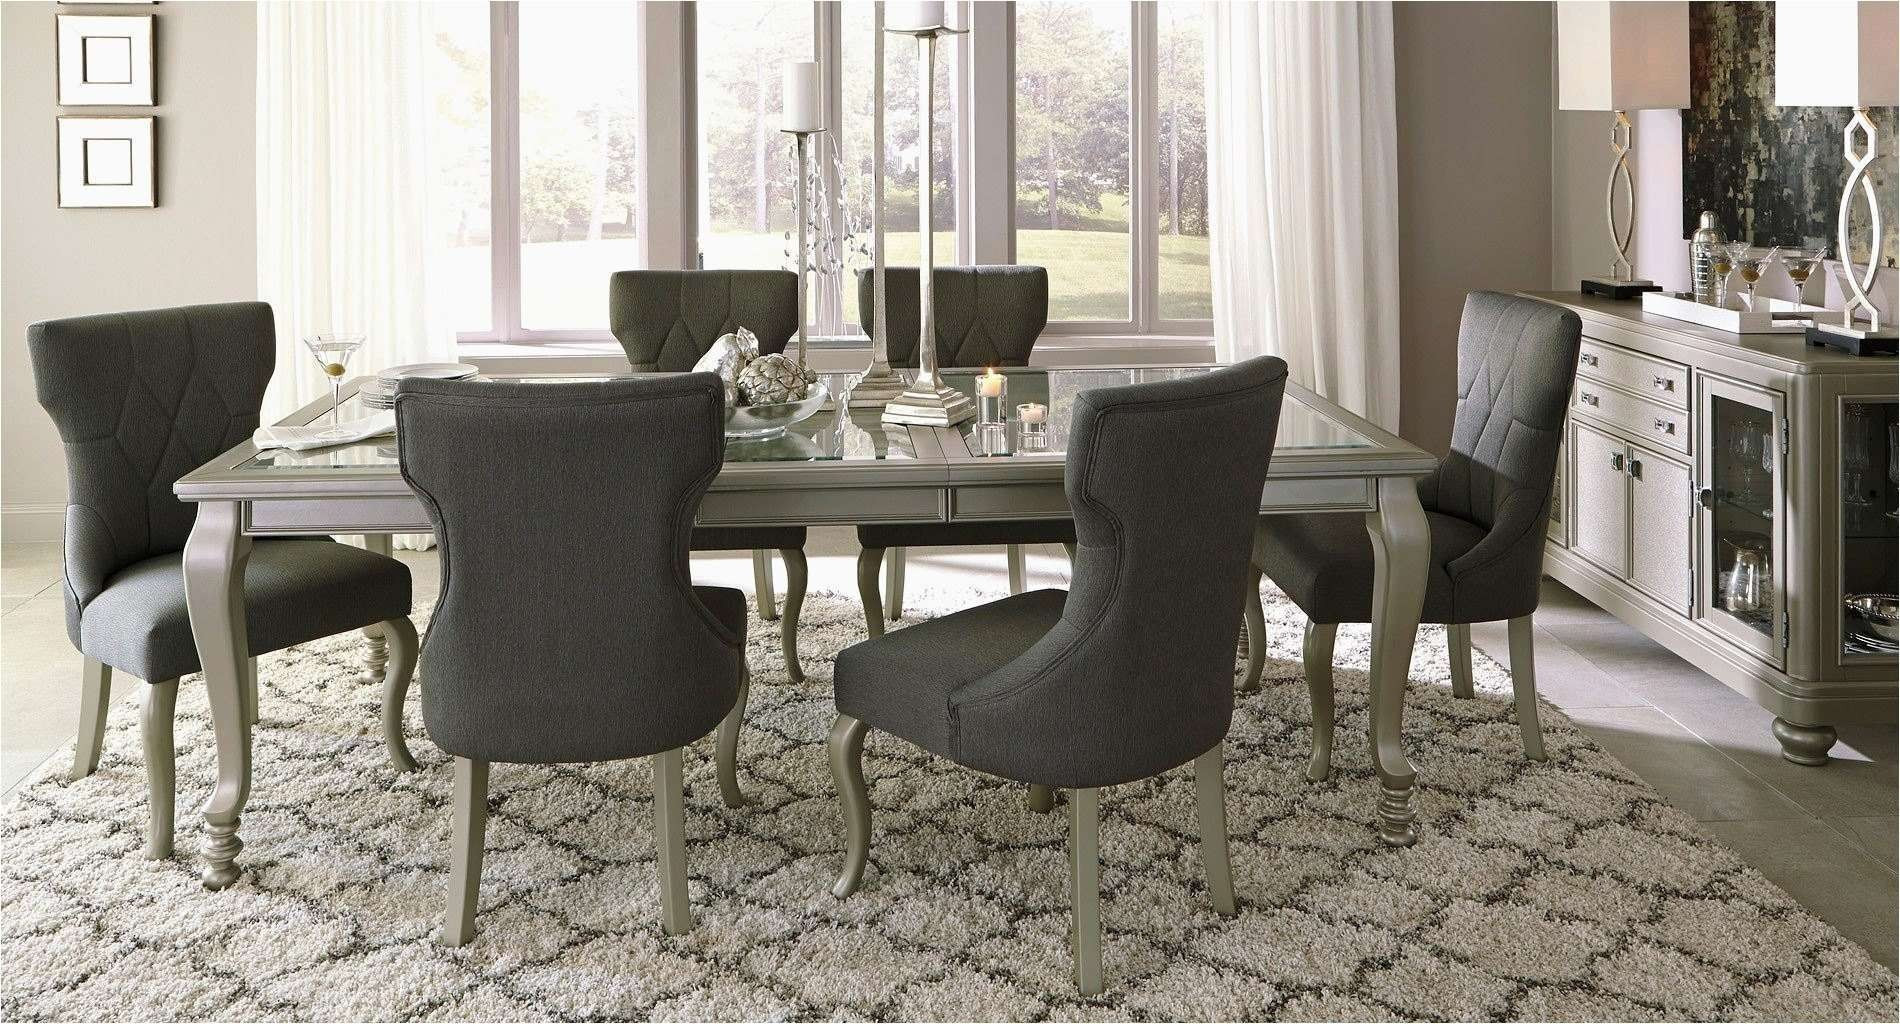 14 Fabulous Modern Vase Decoration Ideas 2024 free download modern vase decoration ideas of new dining room furniture modern home decoration idea in dining table centerpiece ideas pictures unique dining room ideas stylish shaker chairs 0d archives mo